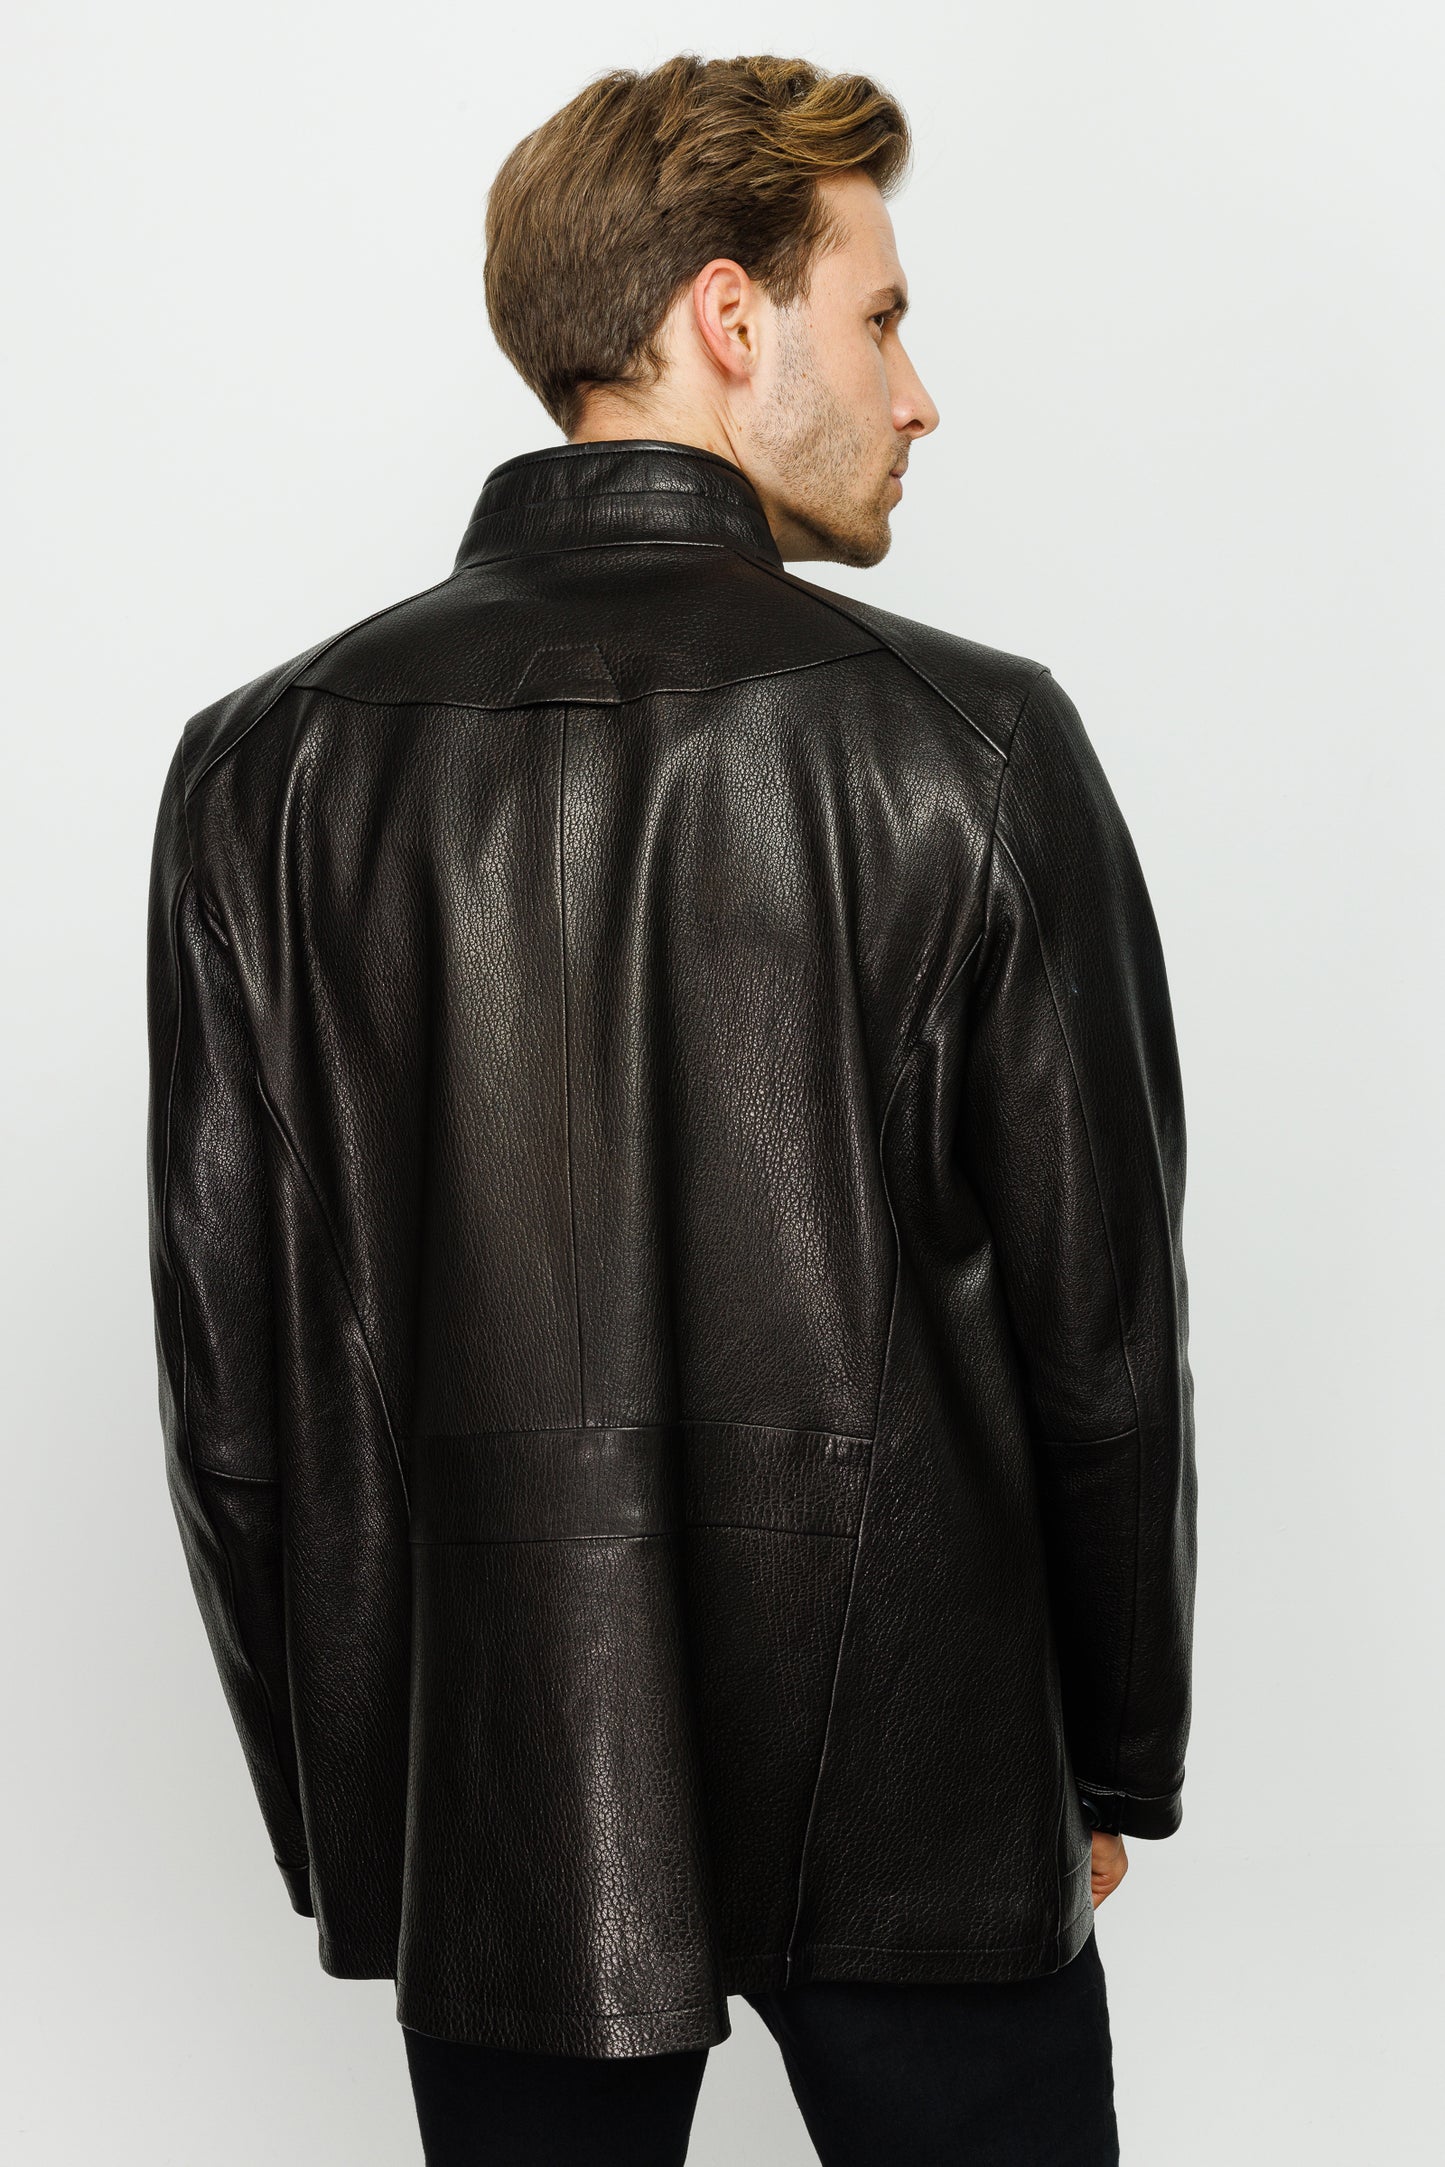 The Barclay Black Leather Men Jacket